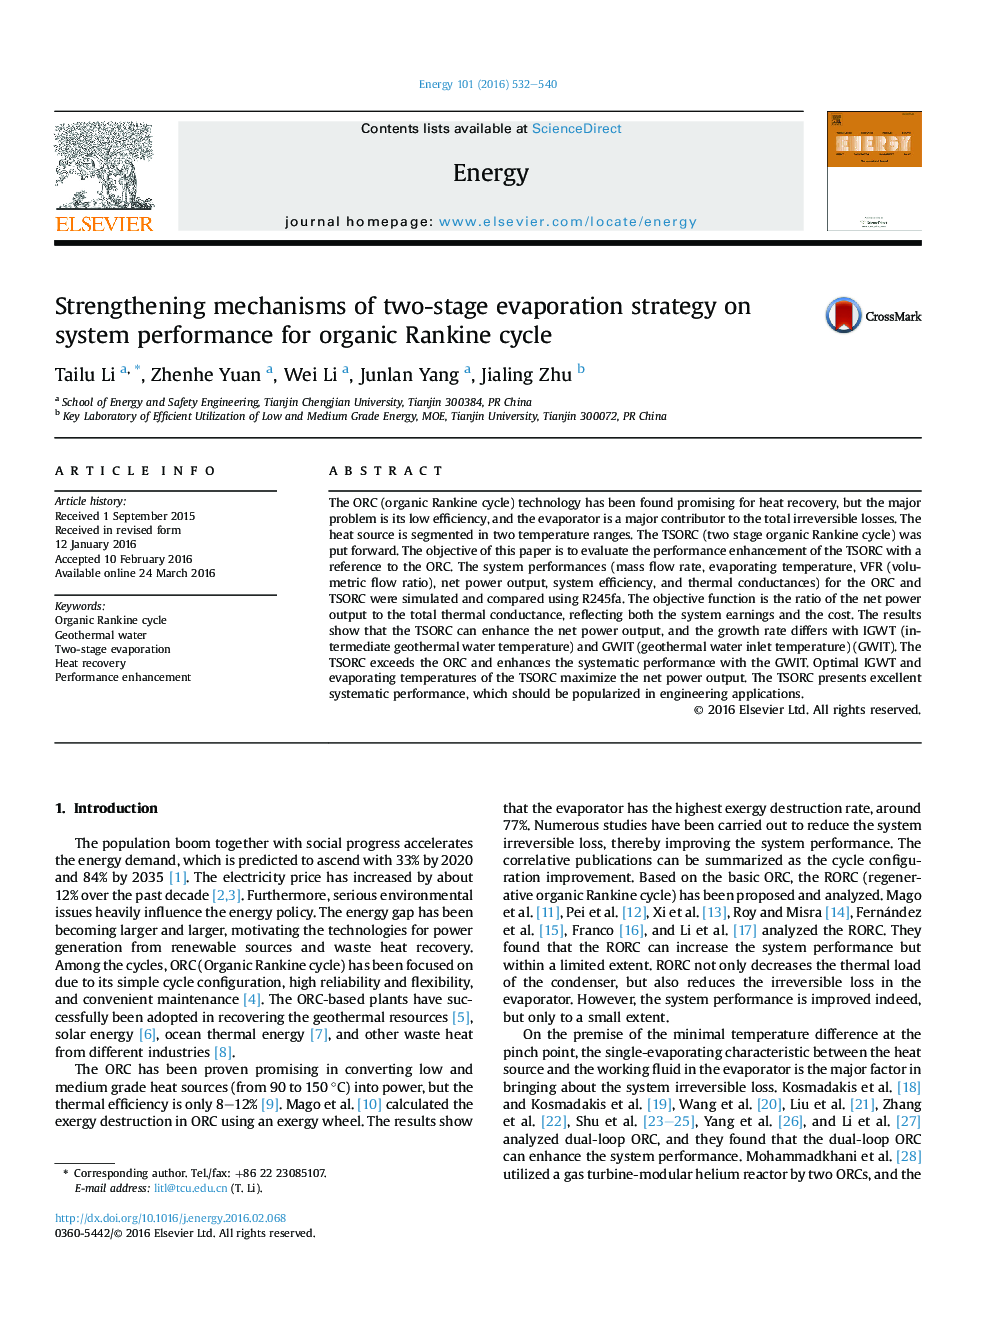 Strengthening mechanisms of two-stage evaporation strategy on system performance for organic Rankine cycle